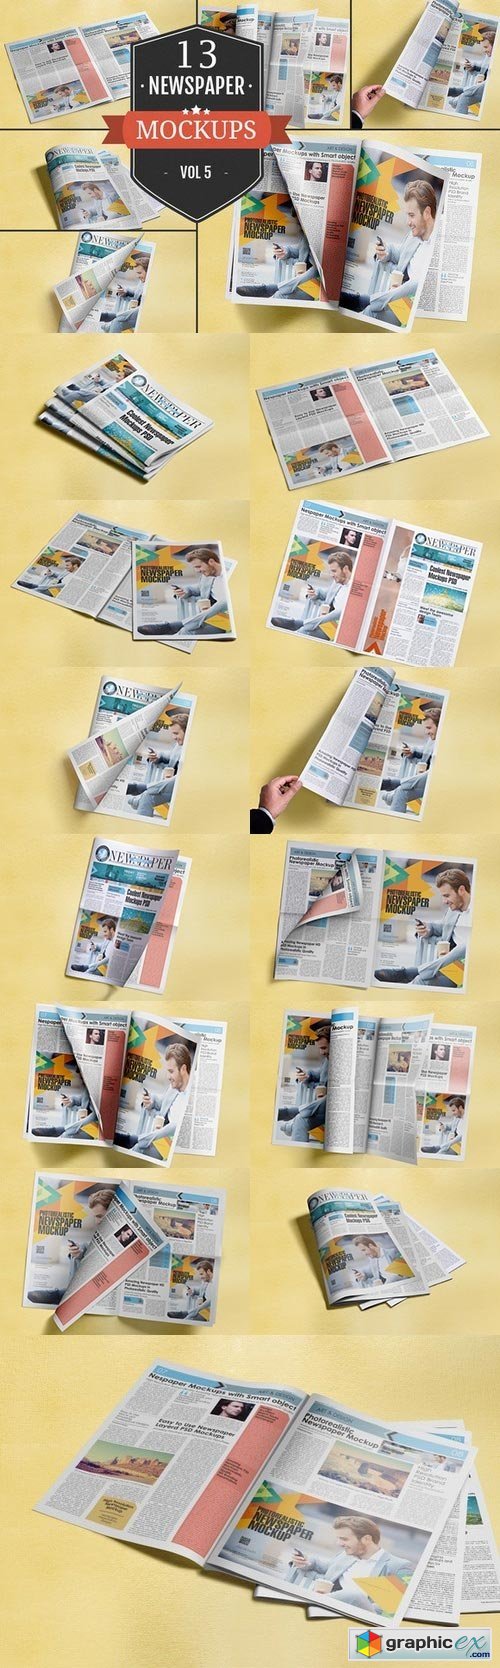 Download Newspaper Advertising Mockups Vol. 5 » Free Download Vector Stock Image Photoshop Icon